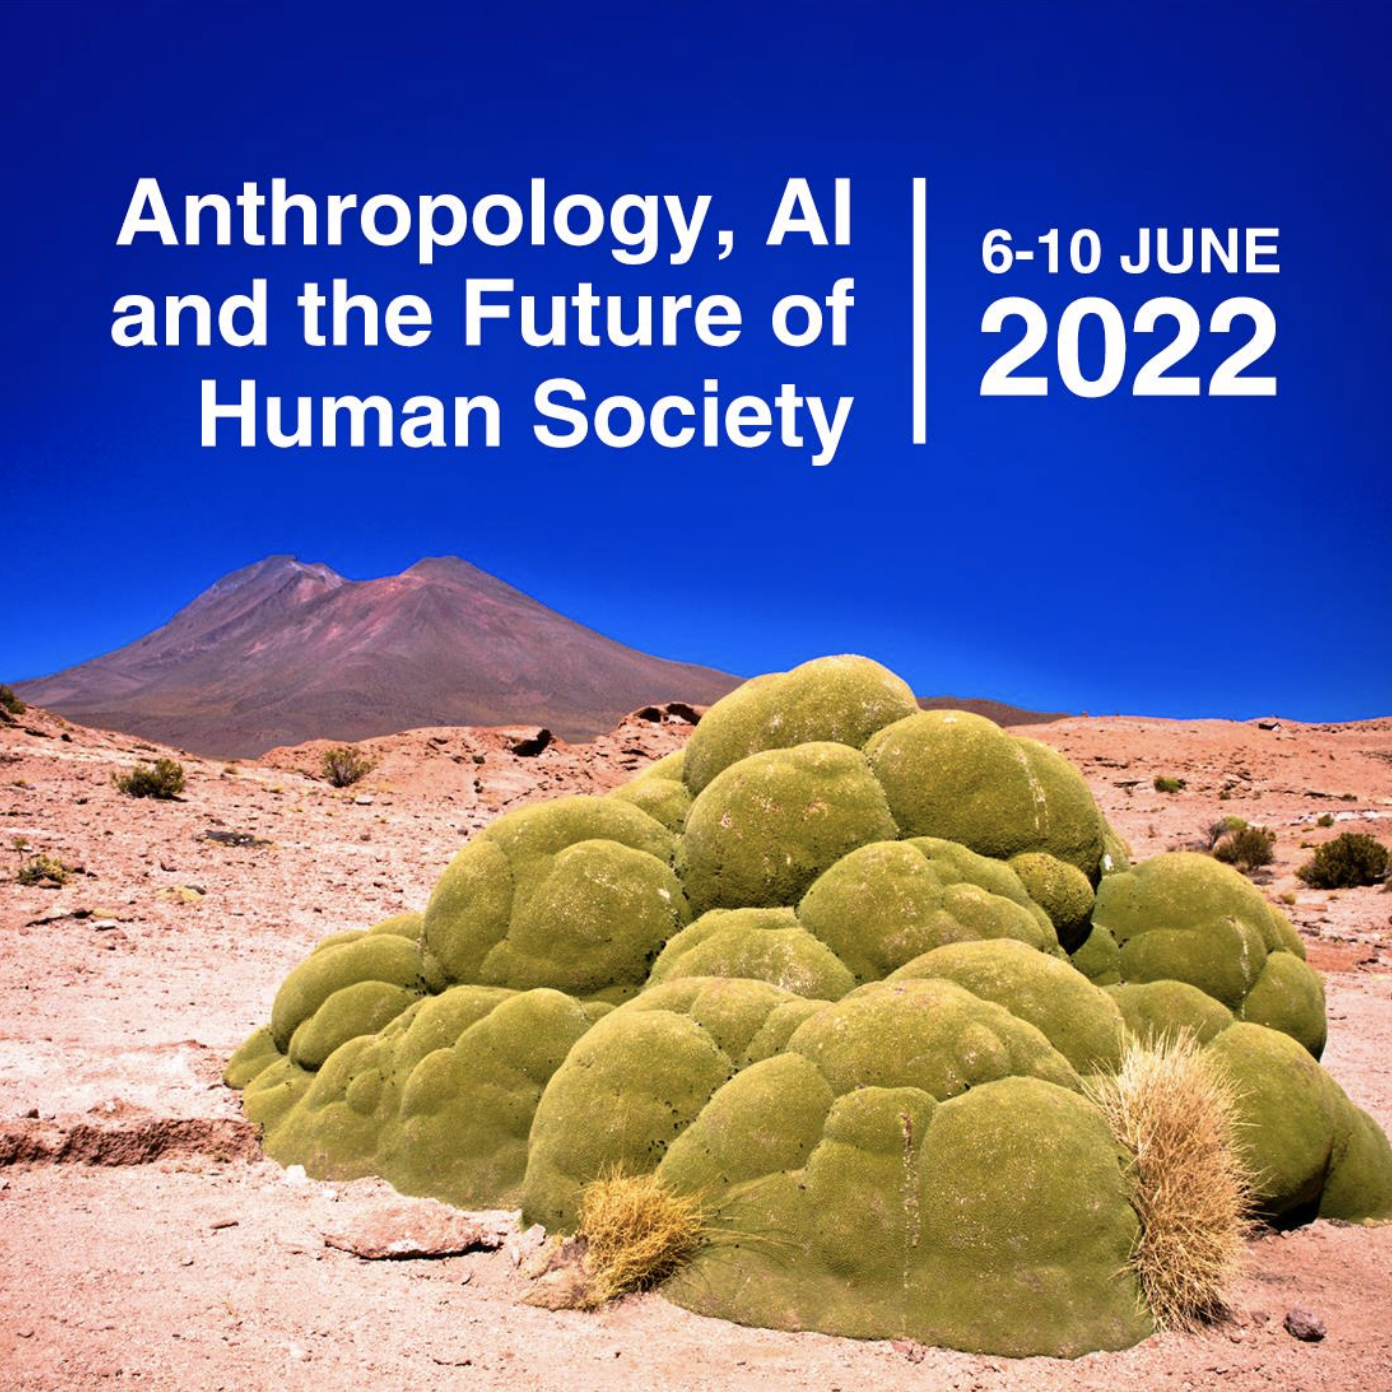 Conference “Anthropology, AI and the Future of Human Society”, Royal Anthropological Institute London